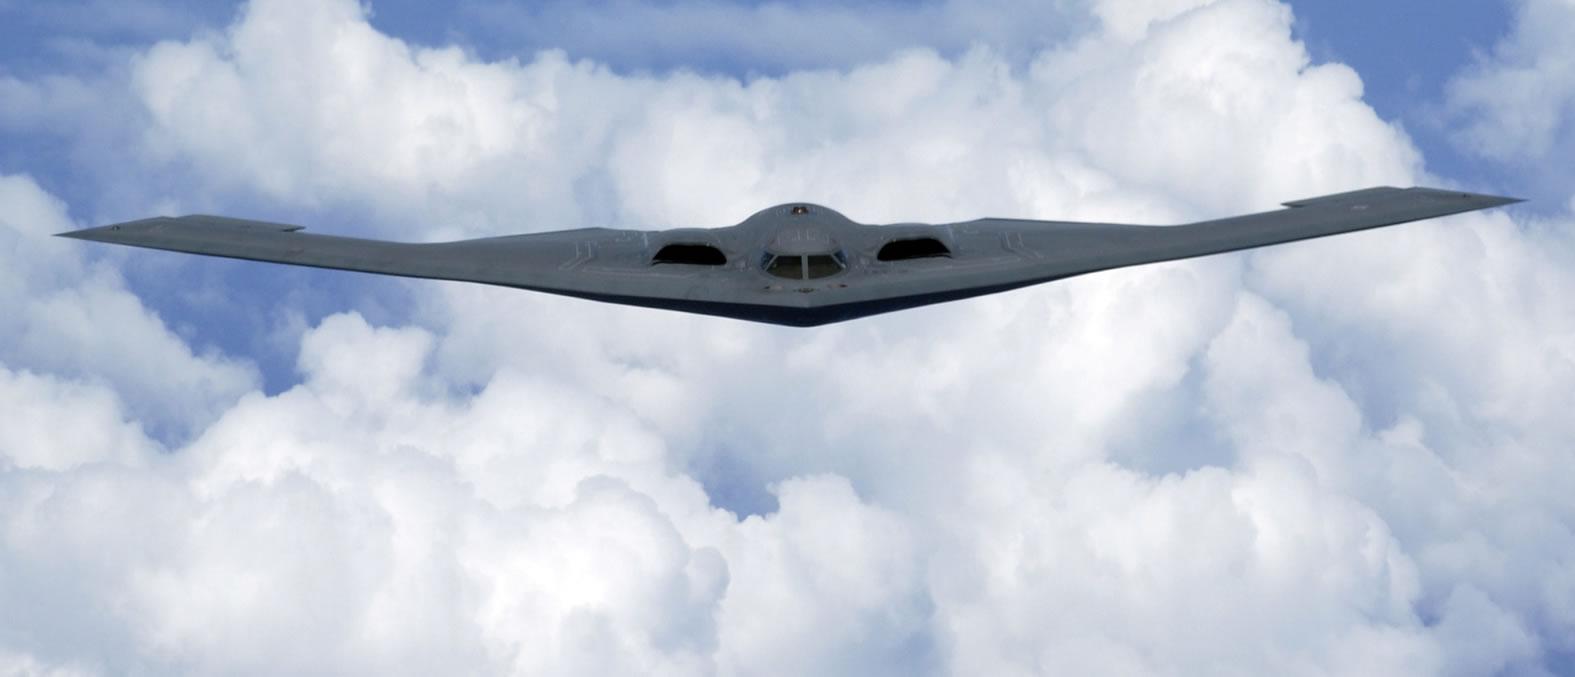 Download B2 Bomber Military Aircraft Wallpaper Gallery